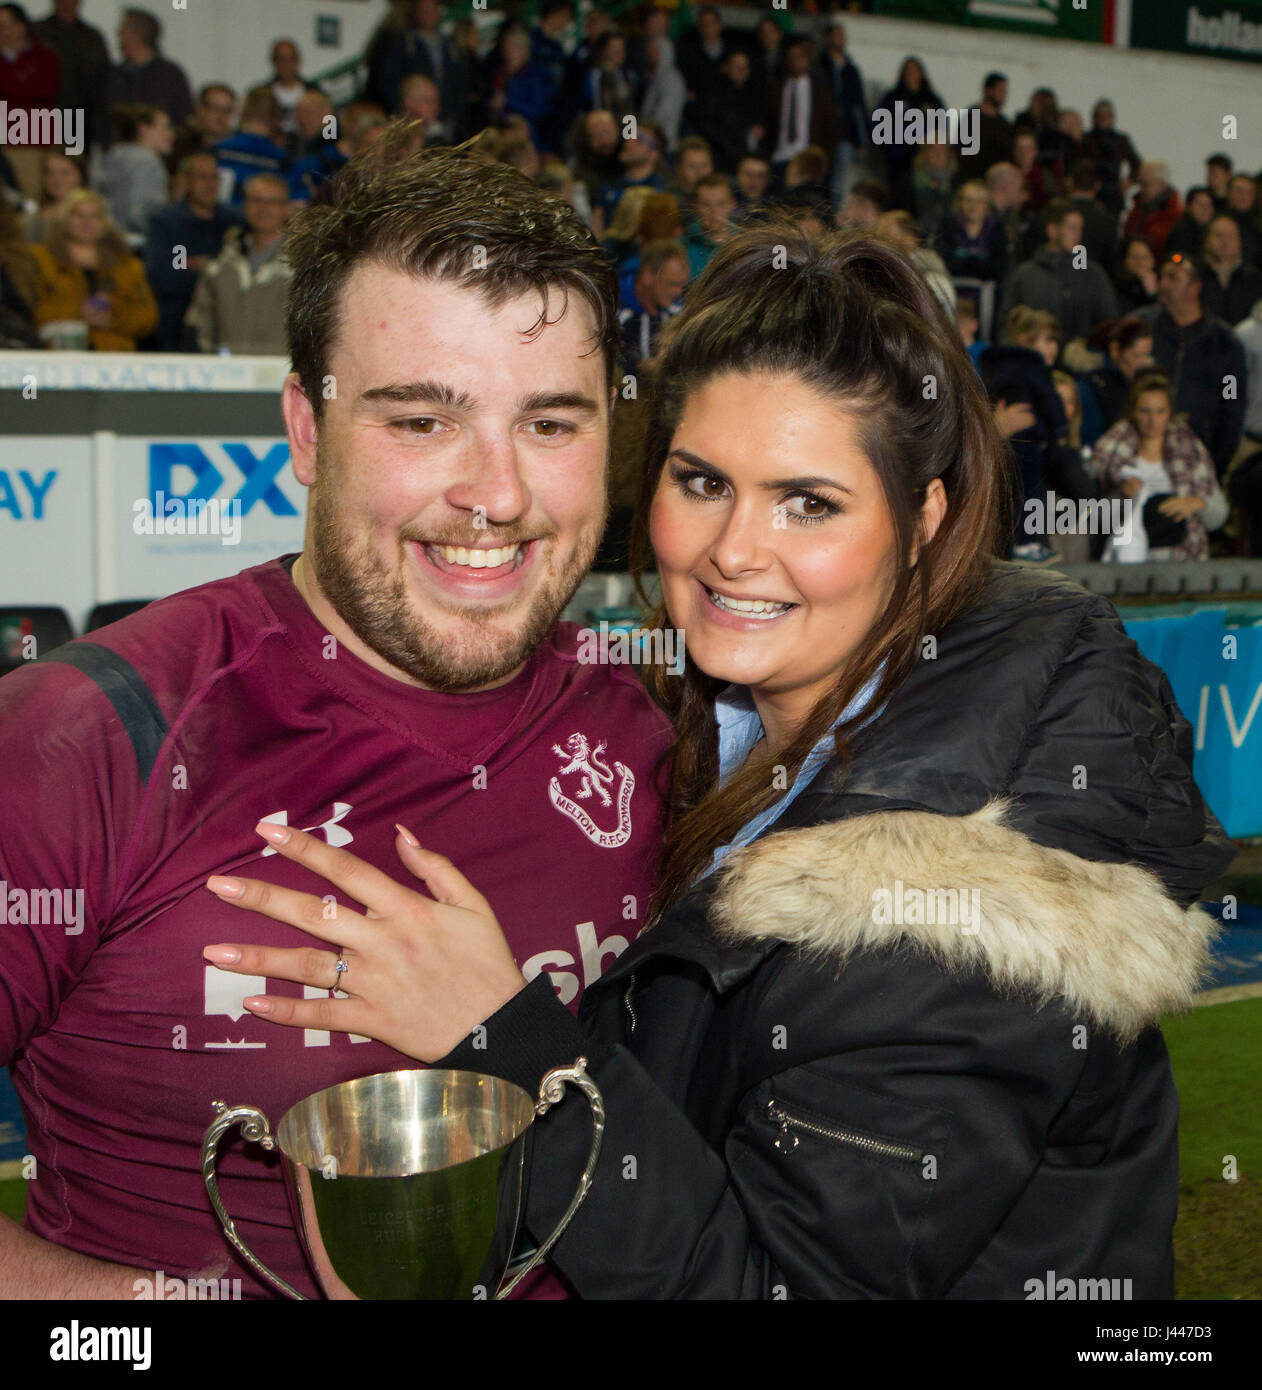 Leicester, UK. 9th May, 2017. Matt Cox proposes to girlfriend Beth immediately after his Melton Mowbray RFC team had won the Leicestershire RFU County Cup (Seniors) at Welford Road. Credit: Phil Hutchinson/Alamy Live News Stock Photo